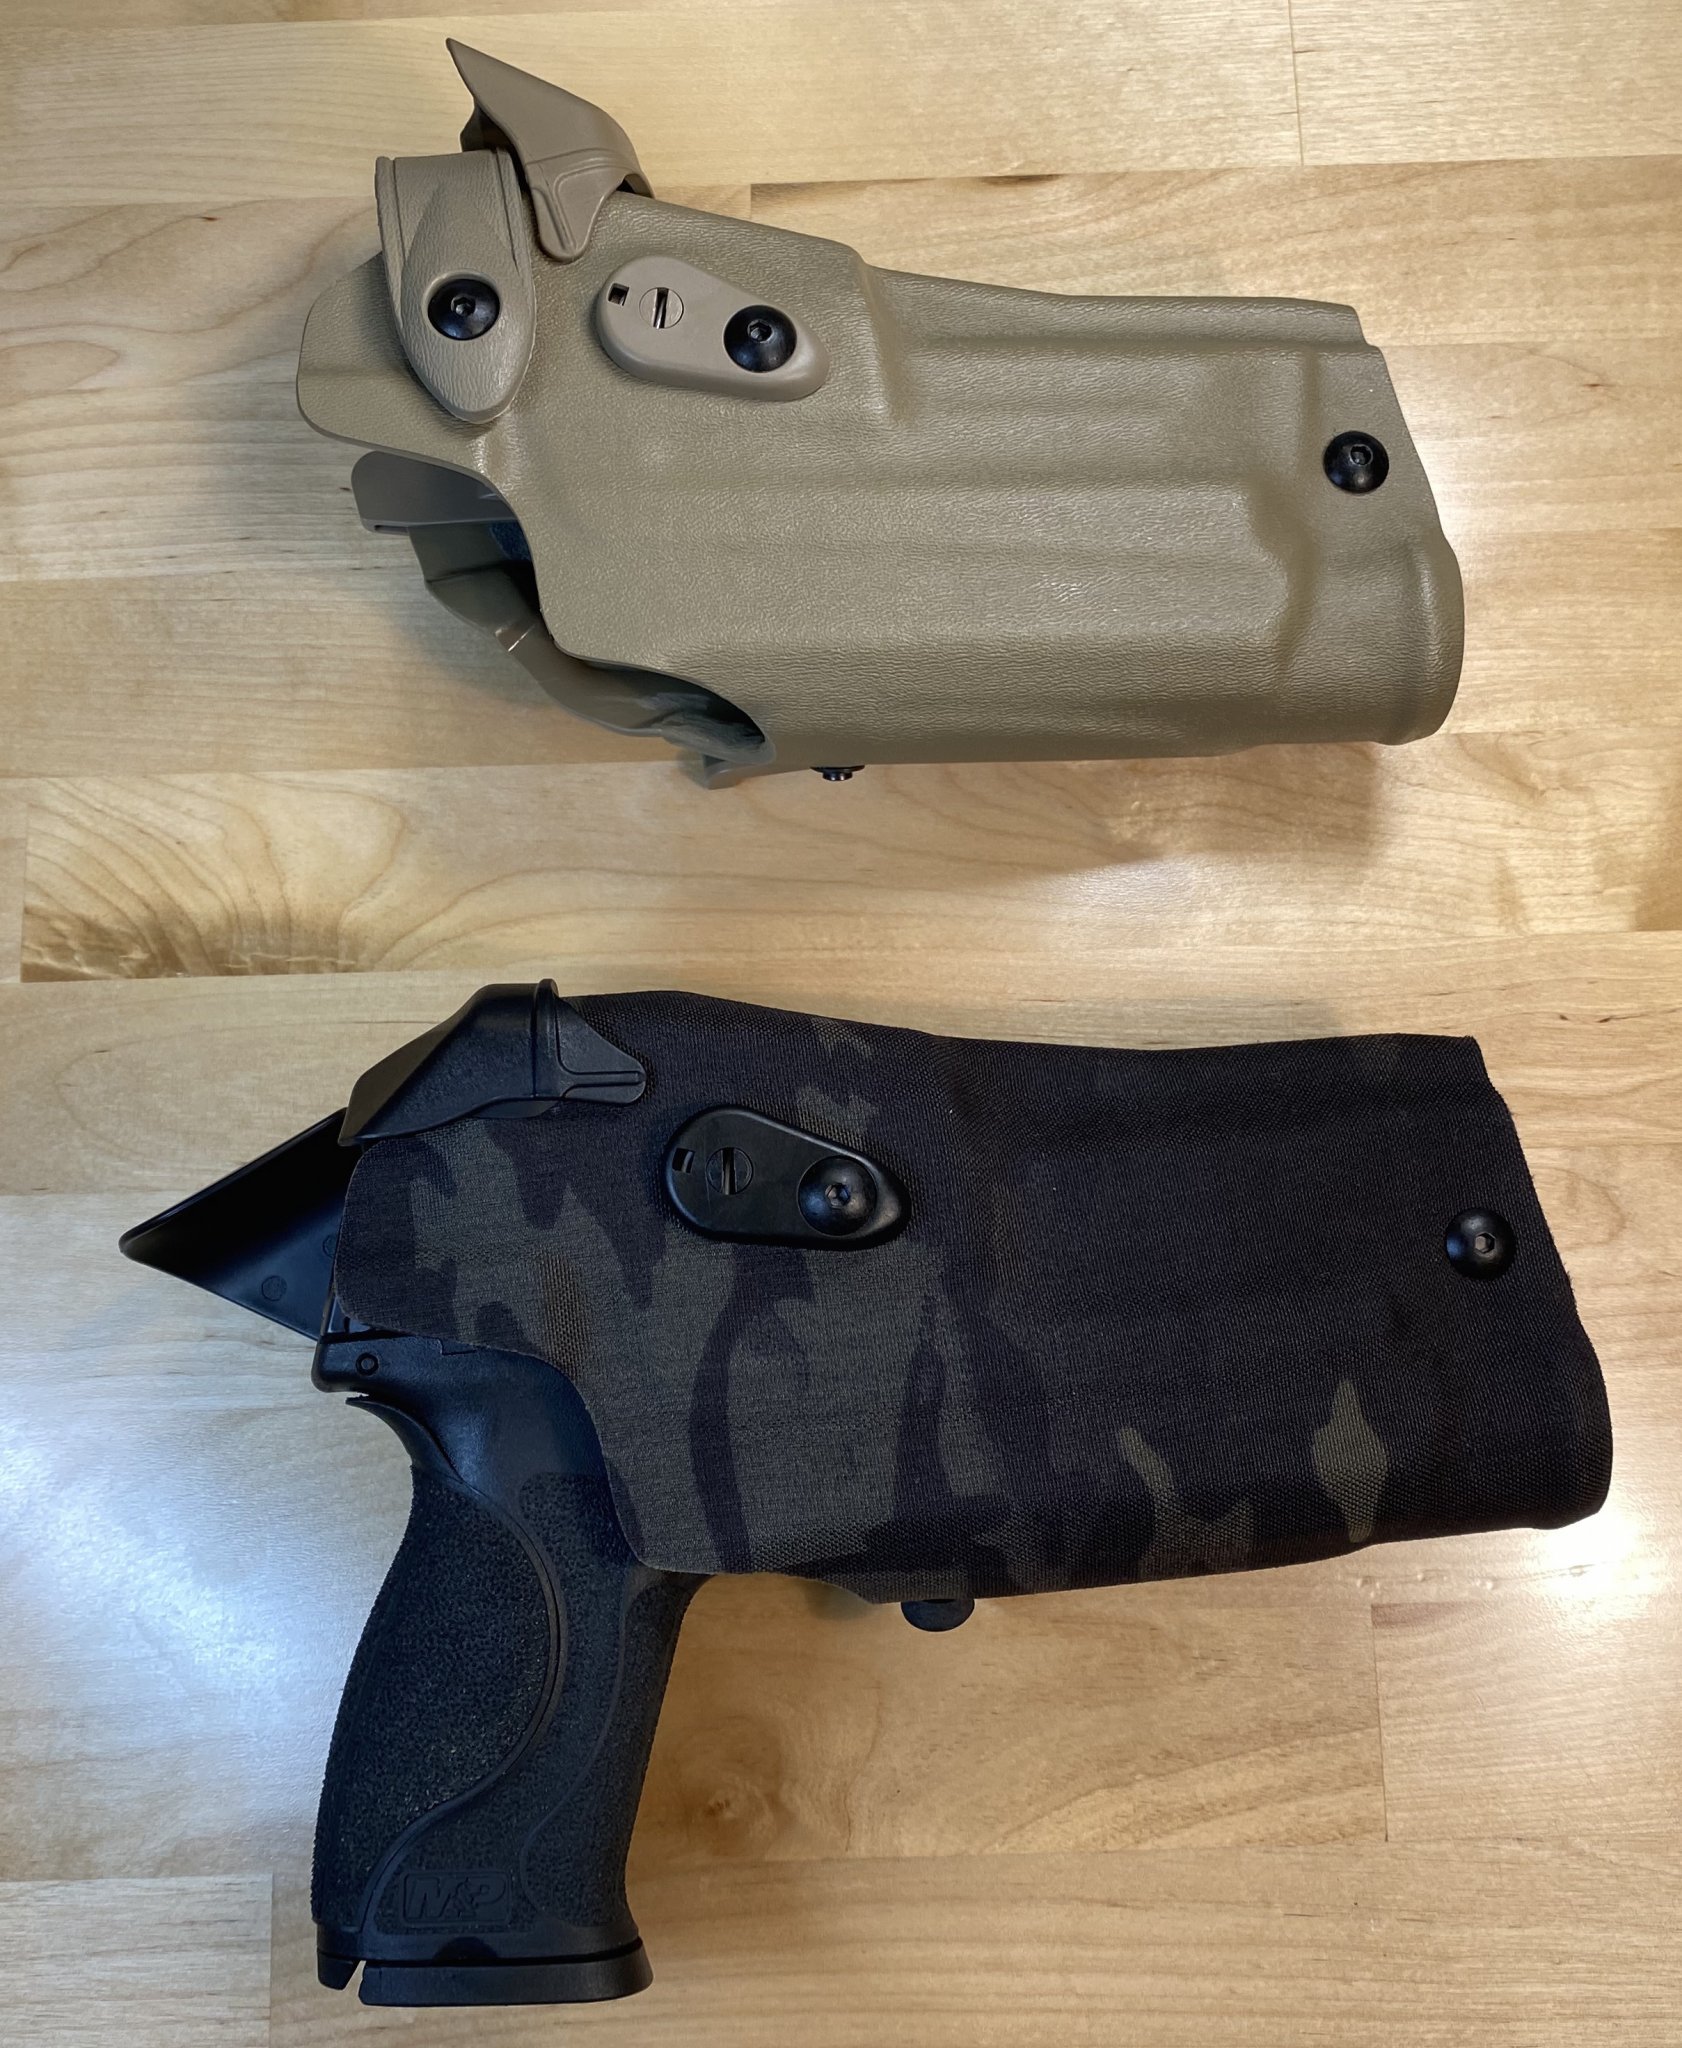 IMG_0148Smith & Wesson M&P 2.0 PC Safariland RDS Black Cammo Holster 07.30.21 copy 2.jpg